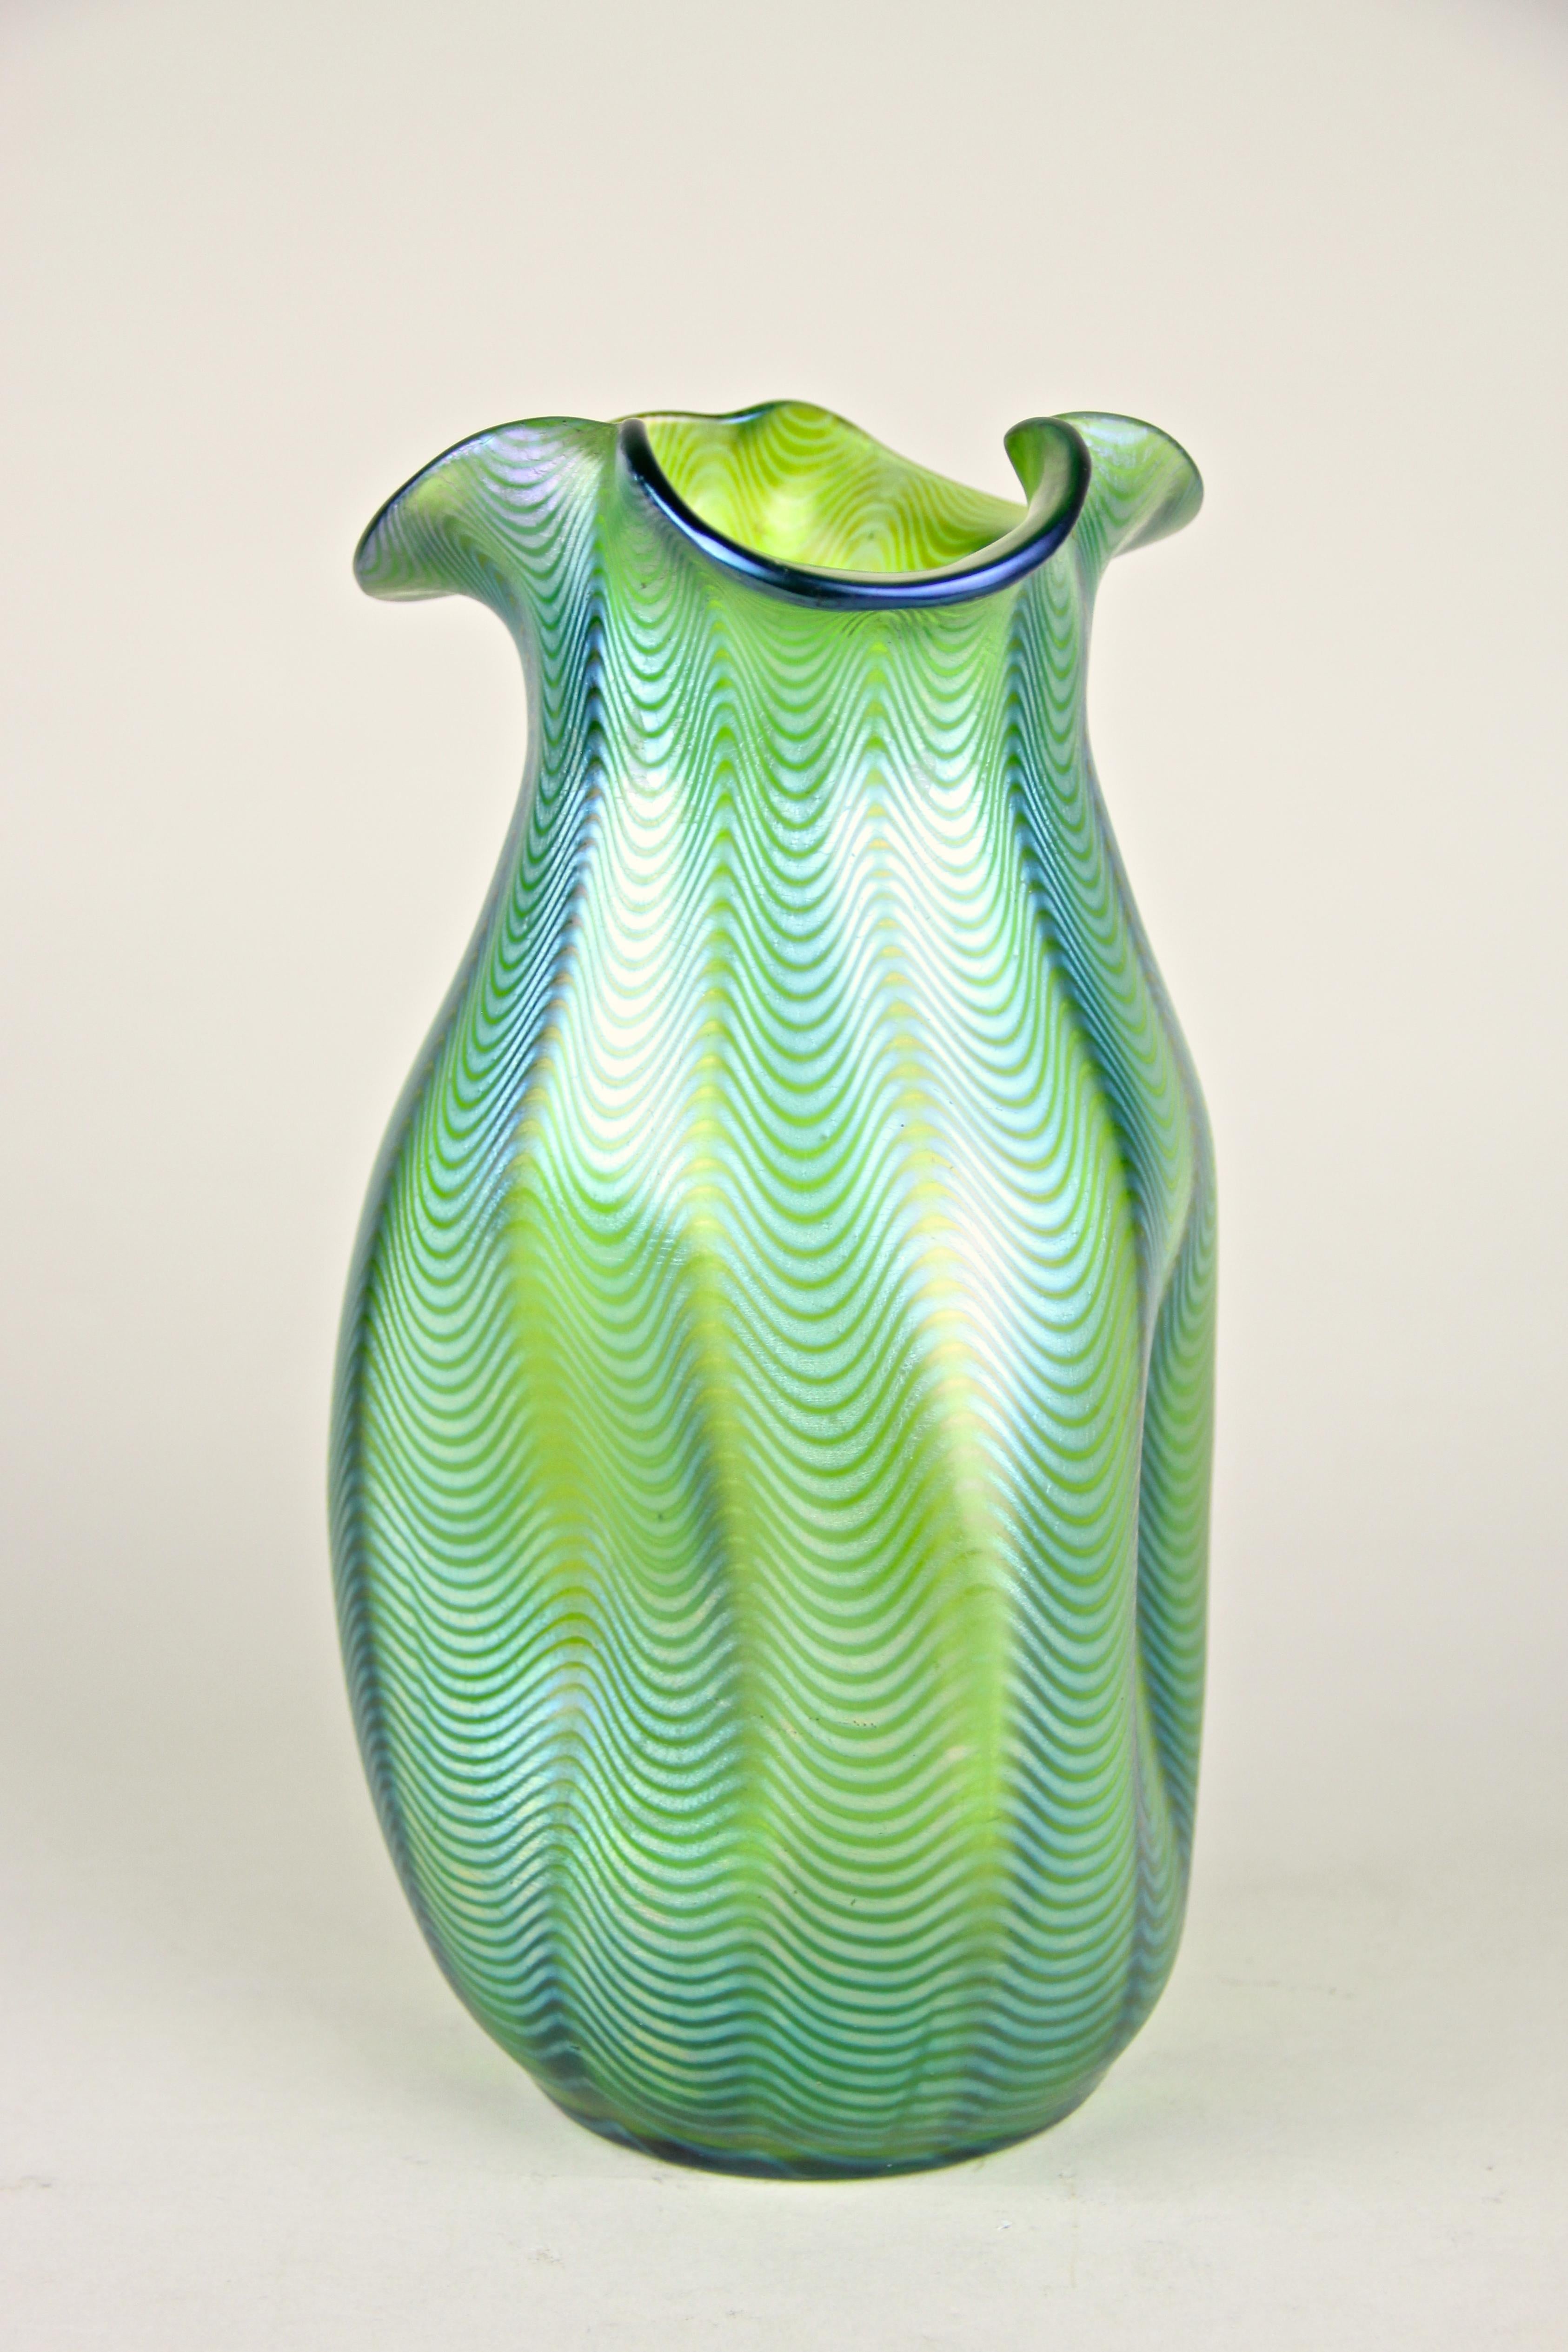 Fantastic Loetz Witwe glass vase with the decoration Crete Phaenomen 6893 made in the famous workshops in Klostermuehle/ Bohemia, circa 1898. This rare execution PN I-7529 shows a lovely green glass base wound with silver yellow, warped into a wave